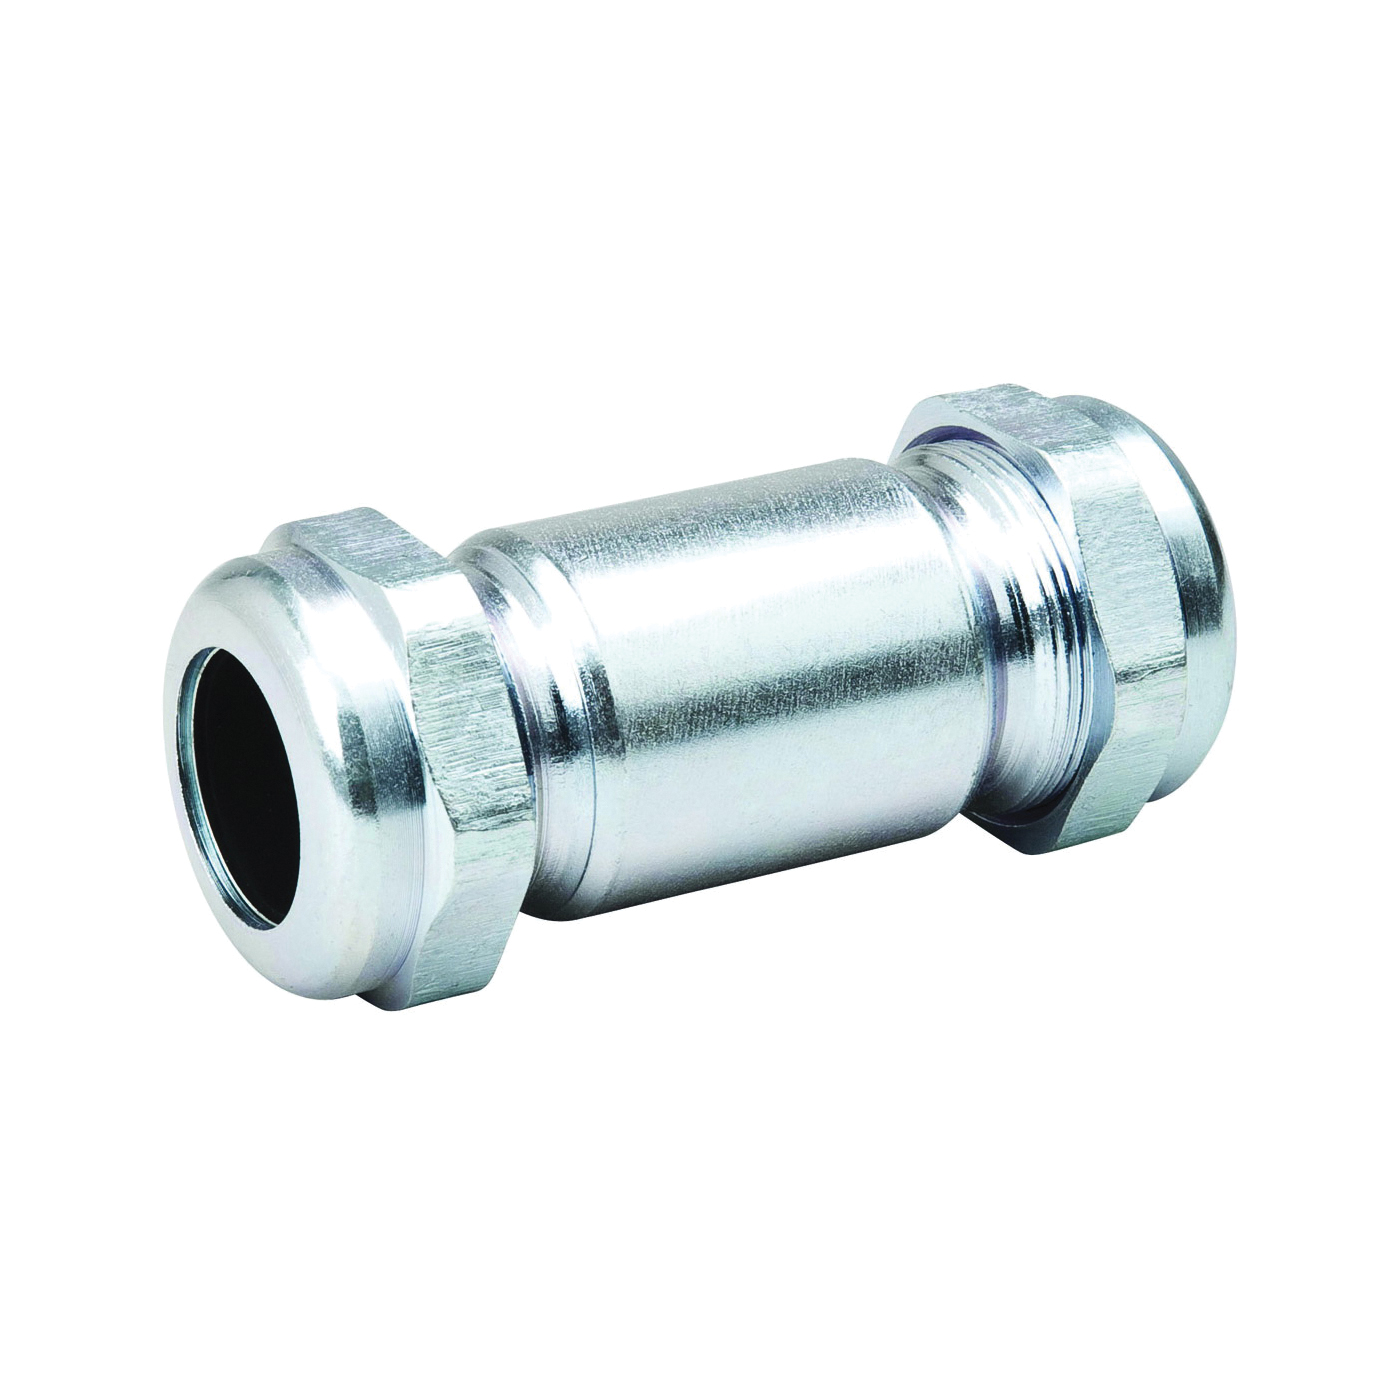 160-005HC Pipe Coupling, 1 in, Compression x IPS, 125 psi Pressure